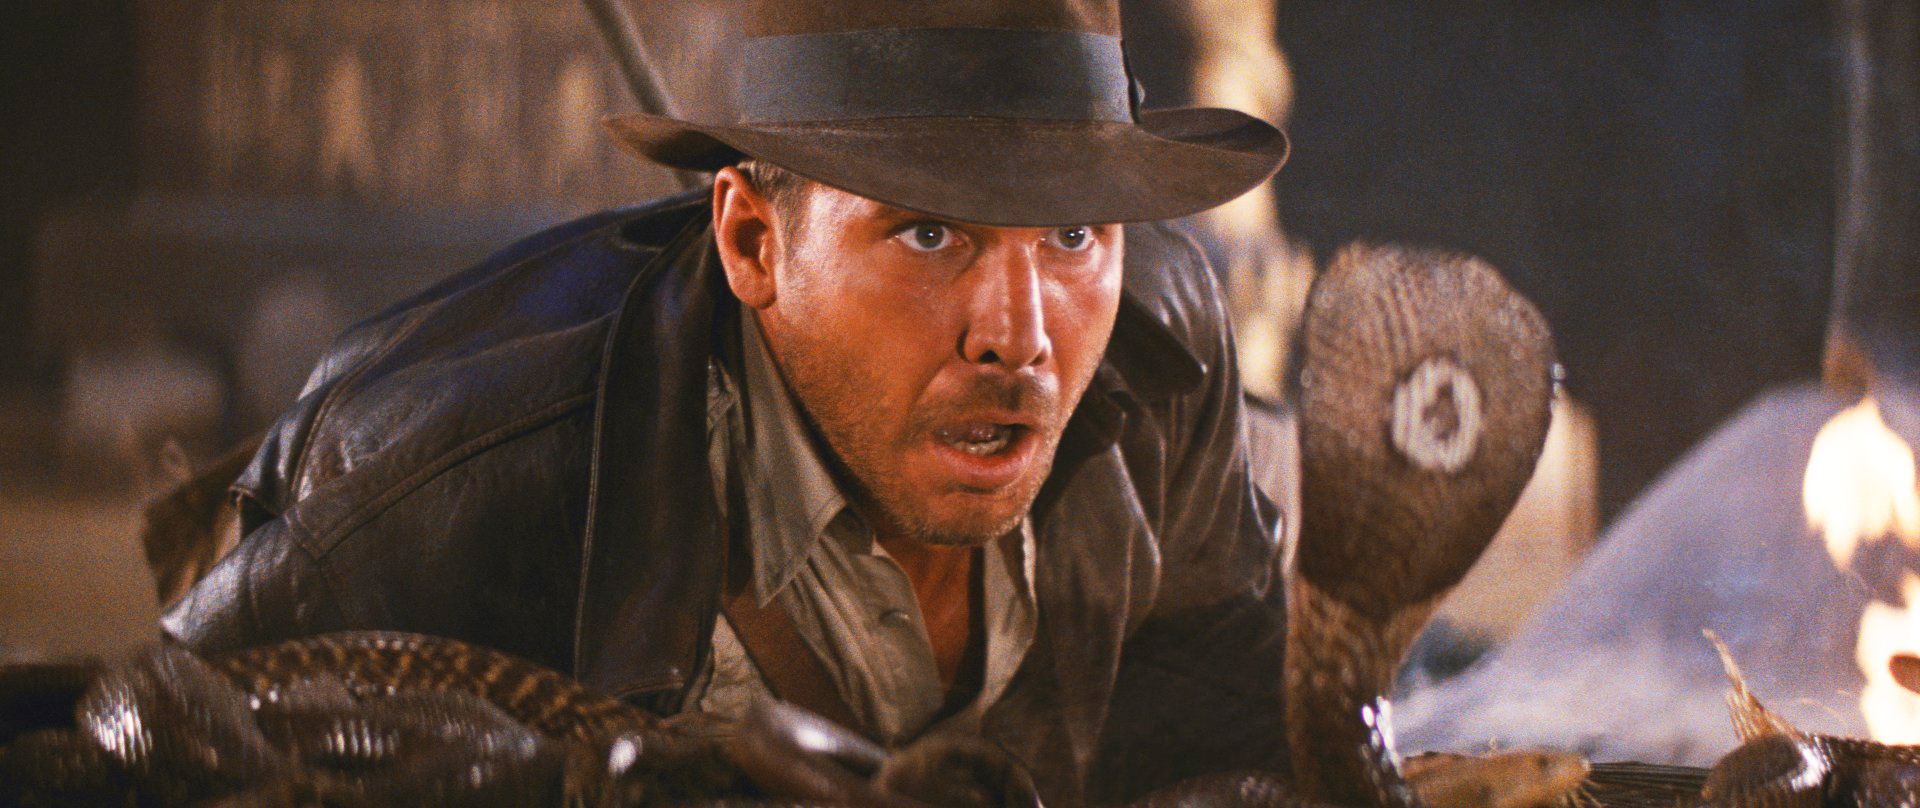 The 6 biggest plot holes in the Indiana Jones movies